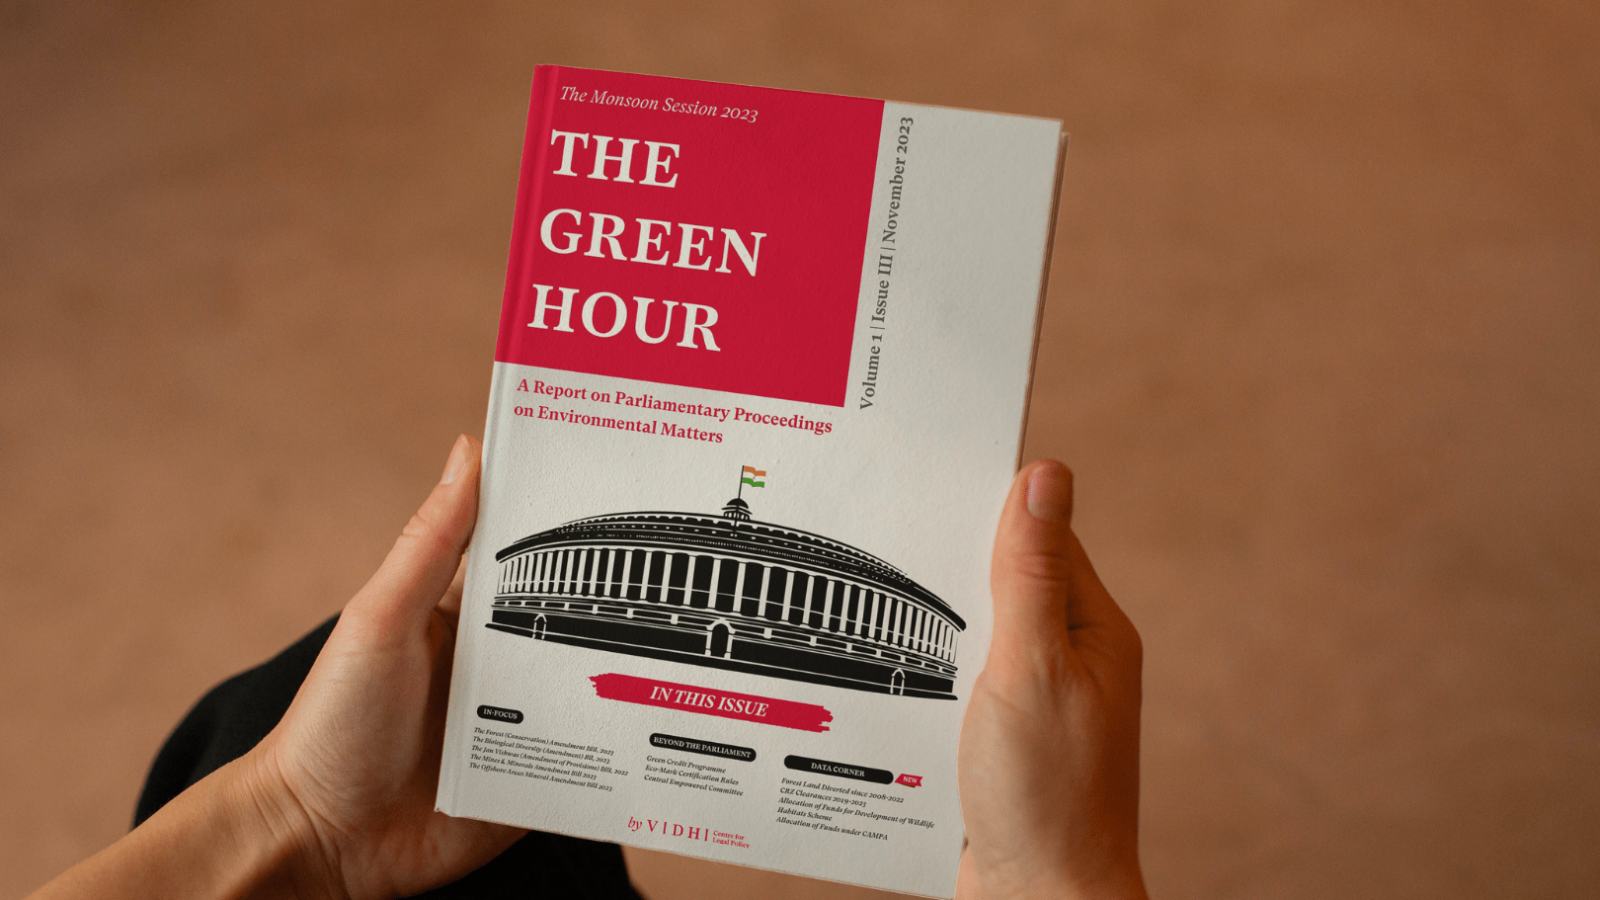 A person holding a harcopy of the green hour publication